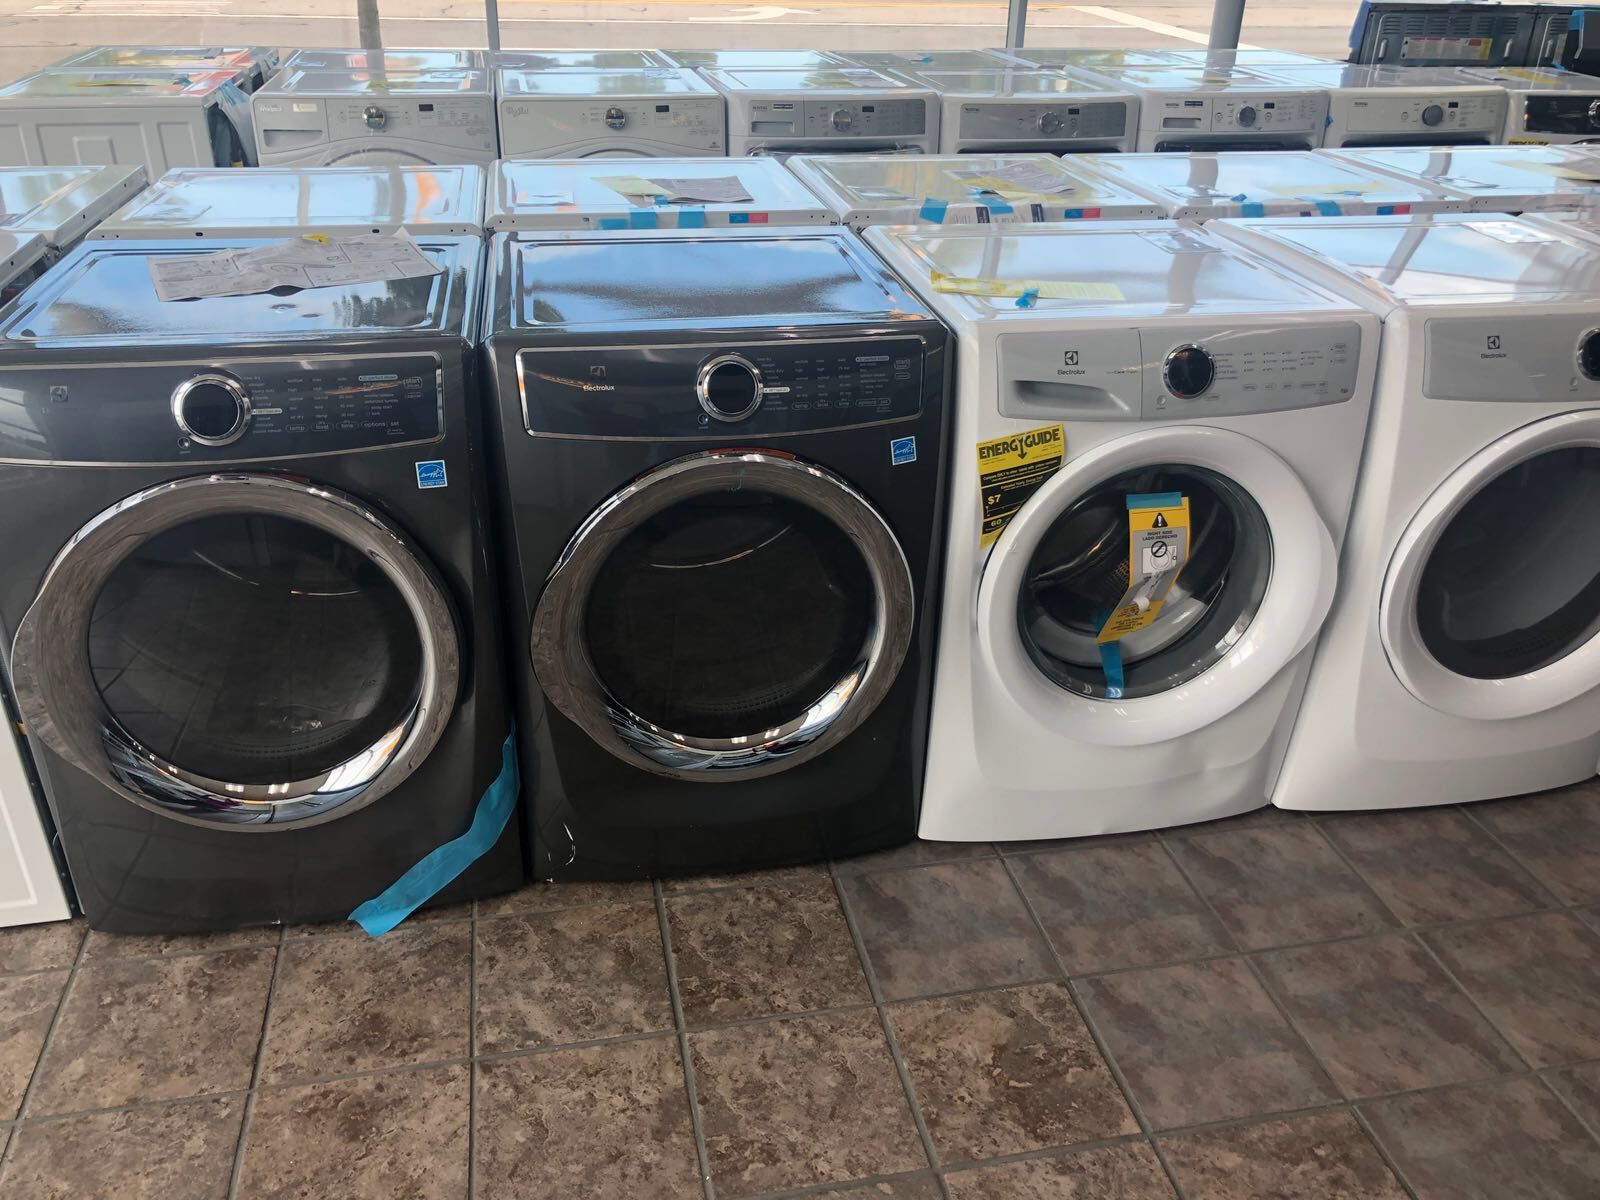 Samsung washers and dryers